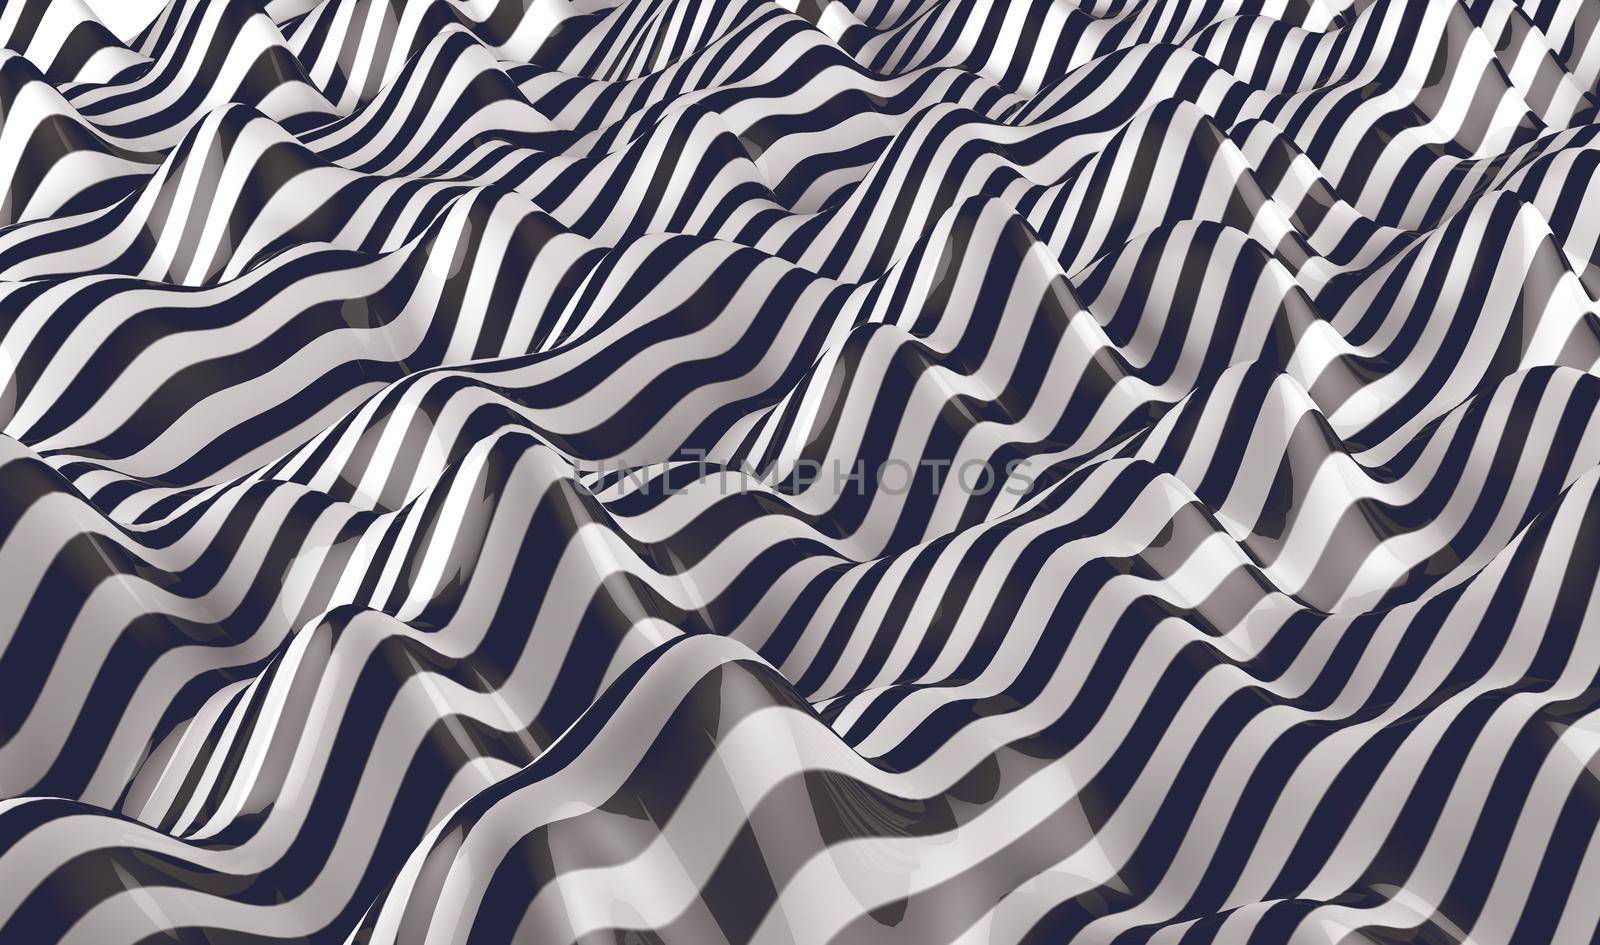 Waves and lines background,Retro style by carloscastilla